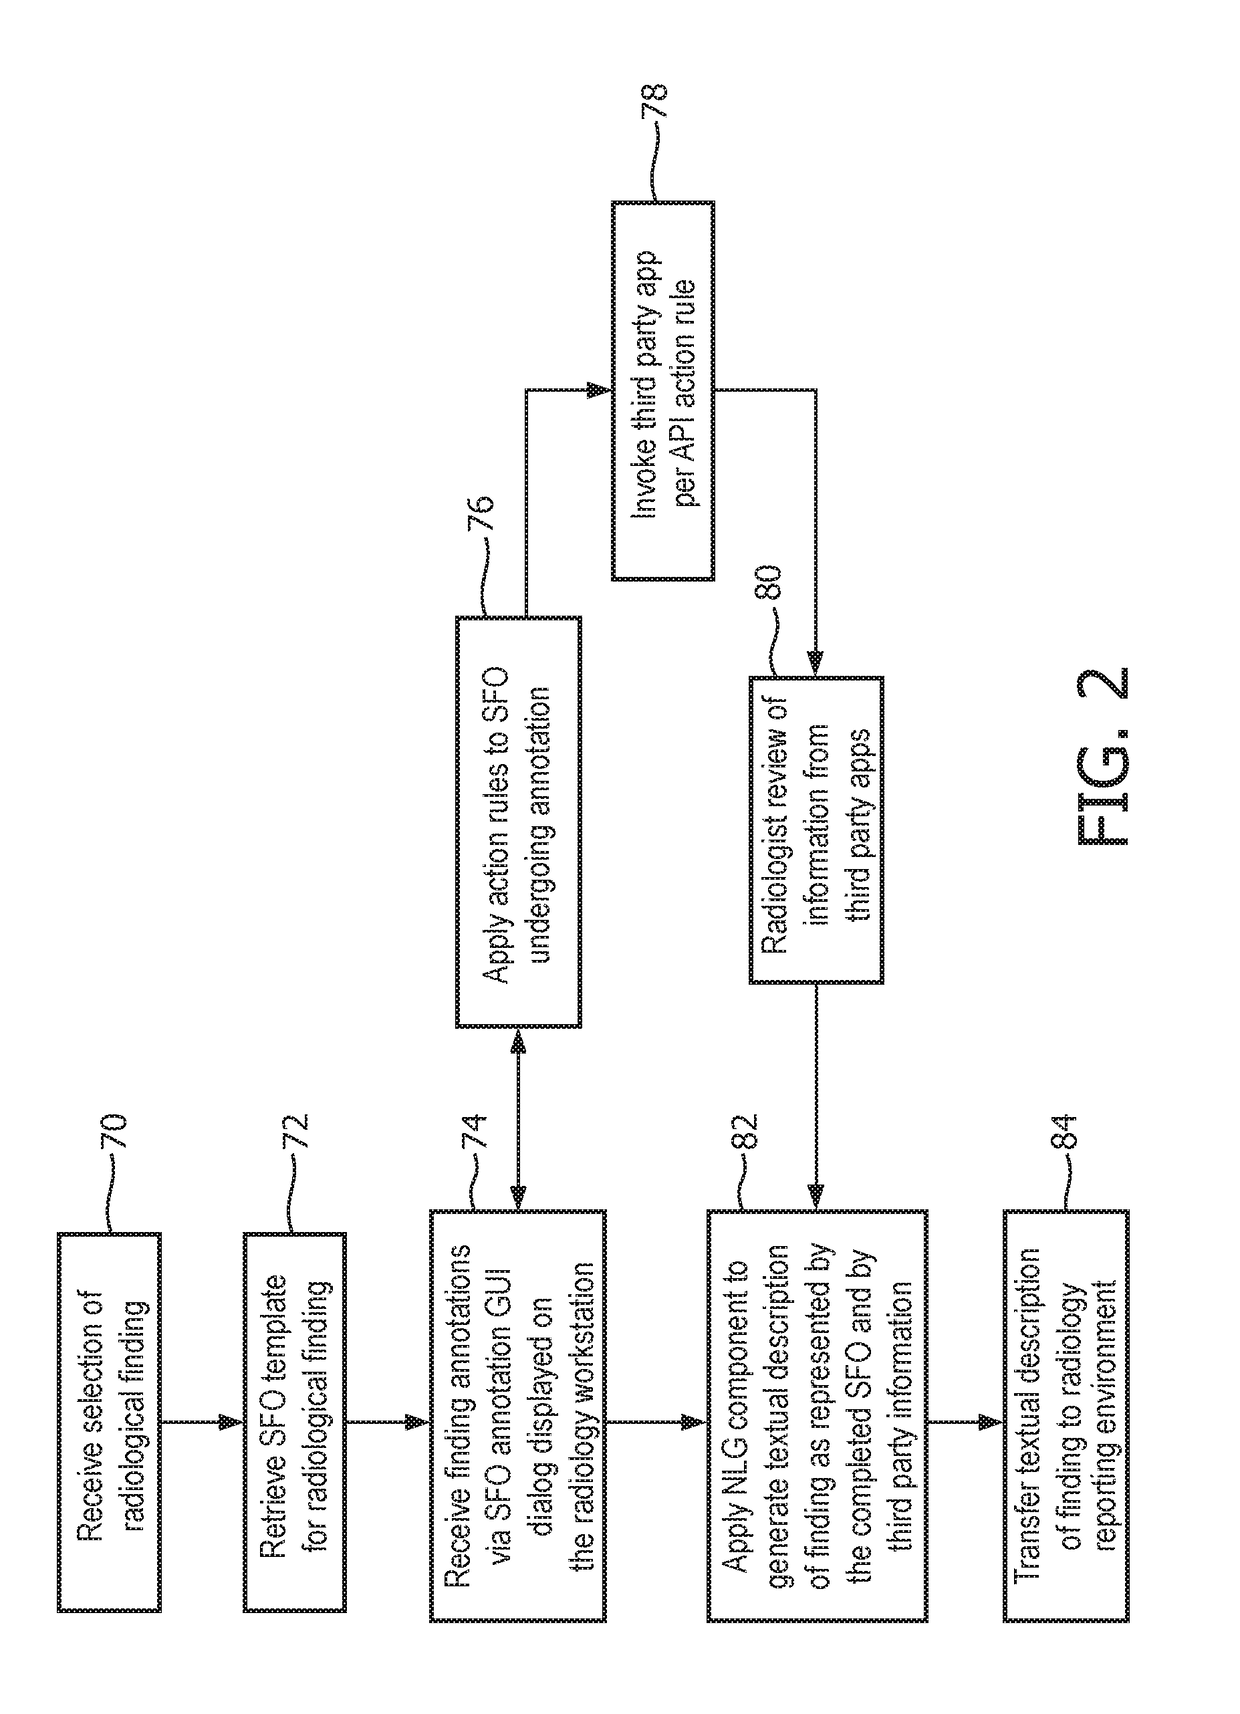 Structured finding objects for integration of third party applications in the image interpretation workflow